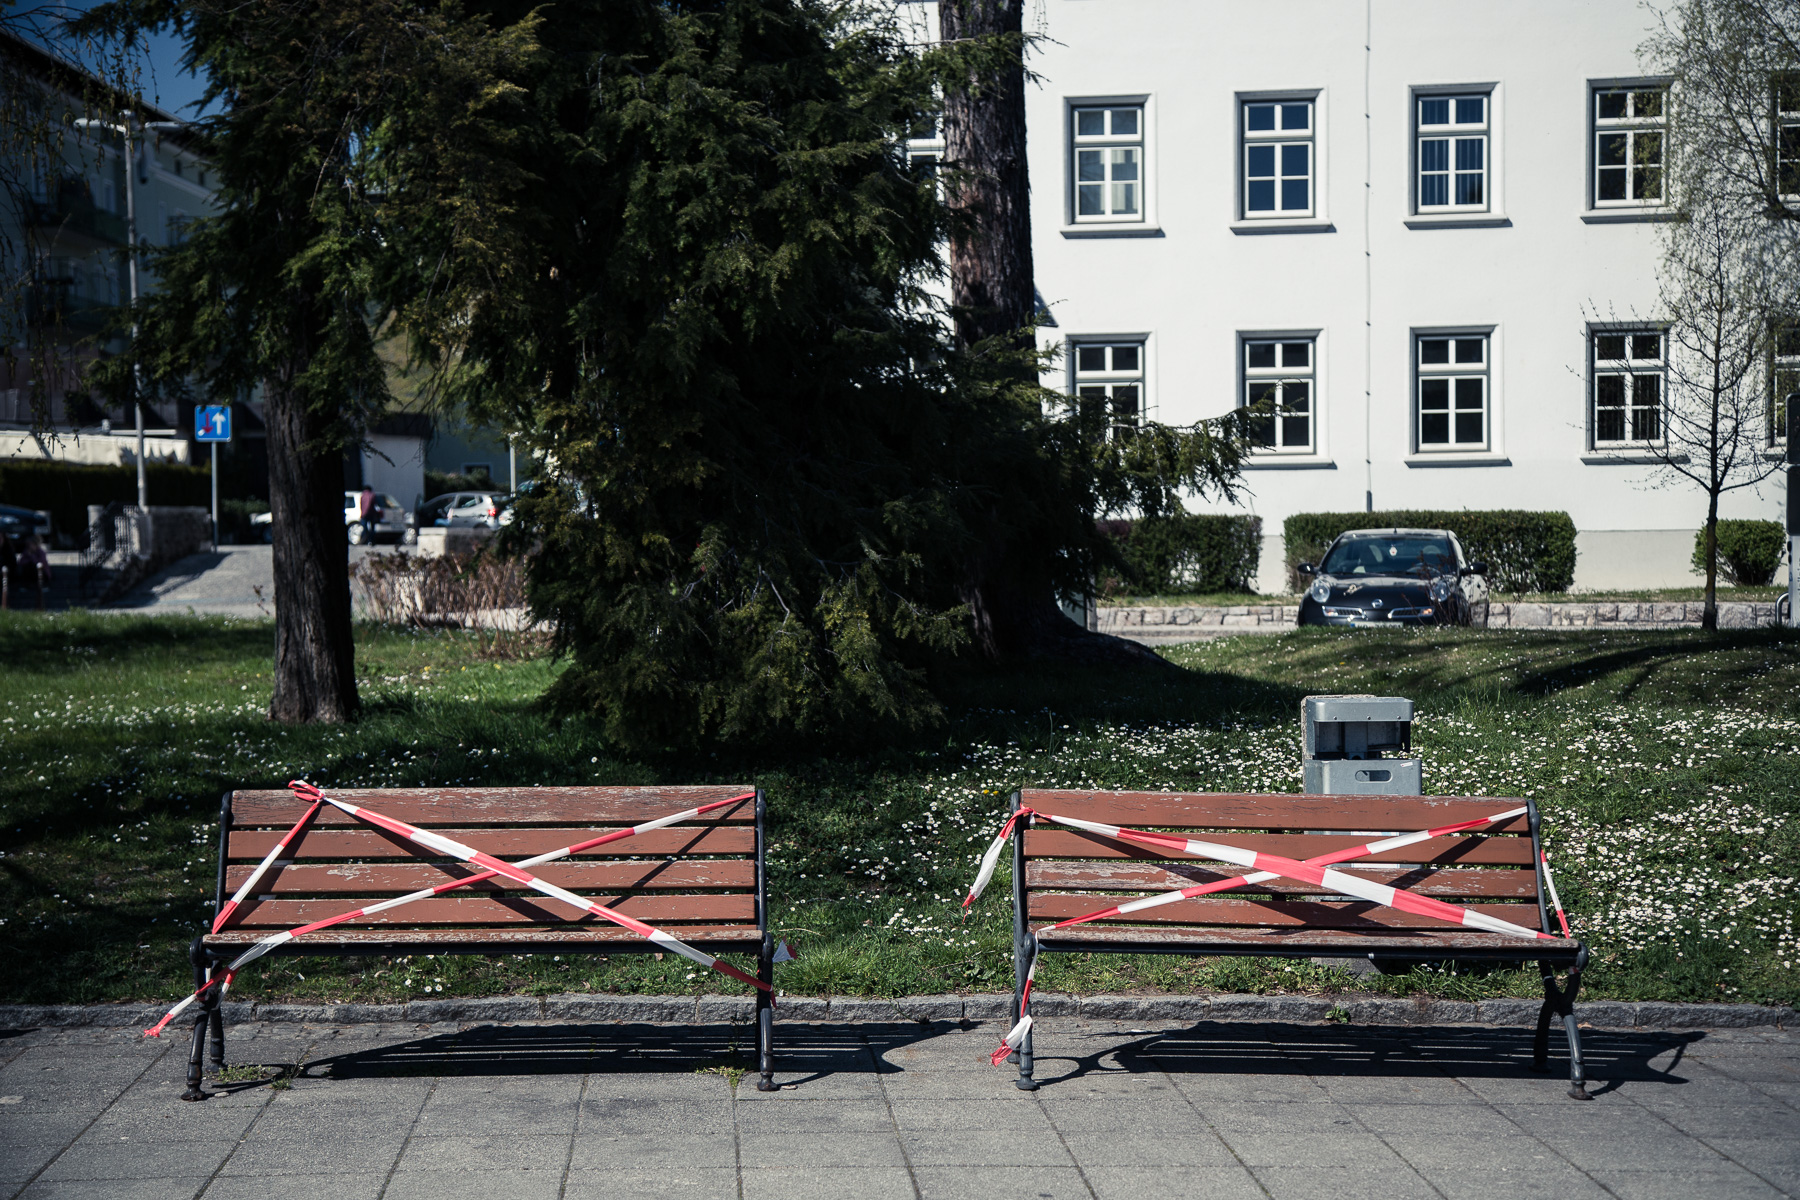 Benches are seen taped over as strict outdoor activities and social distancing measures are implemented in Kranj, Slovenia.